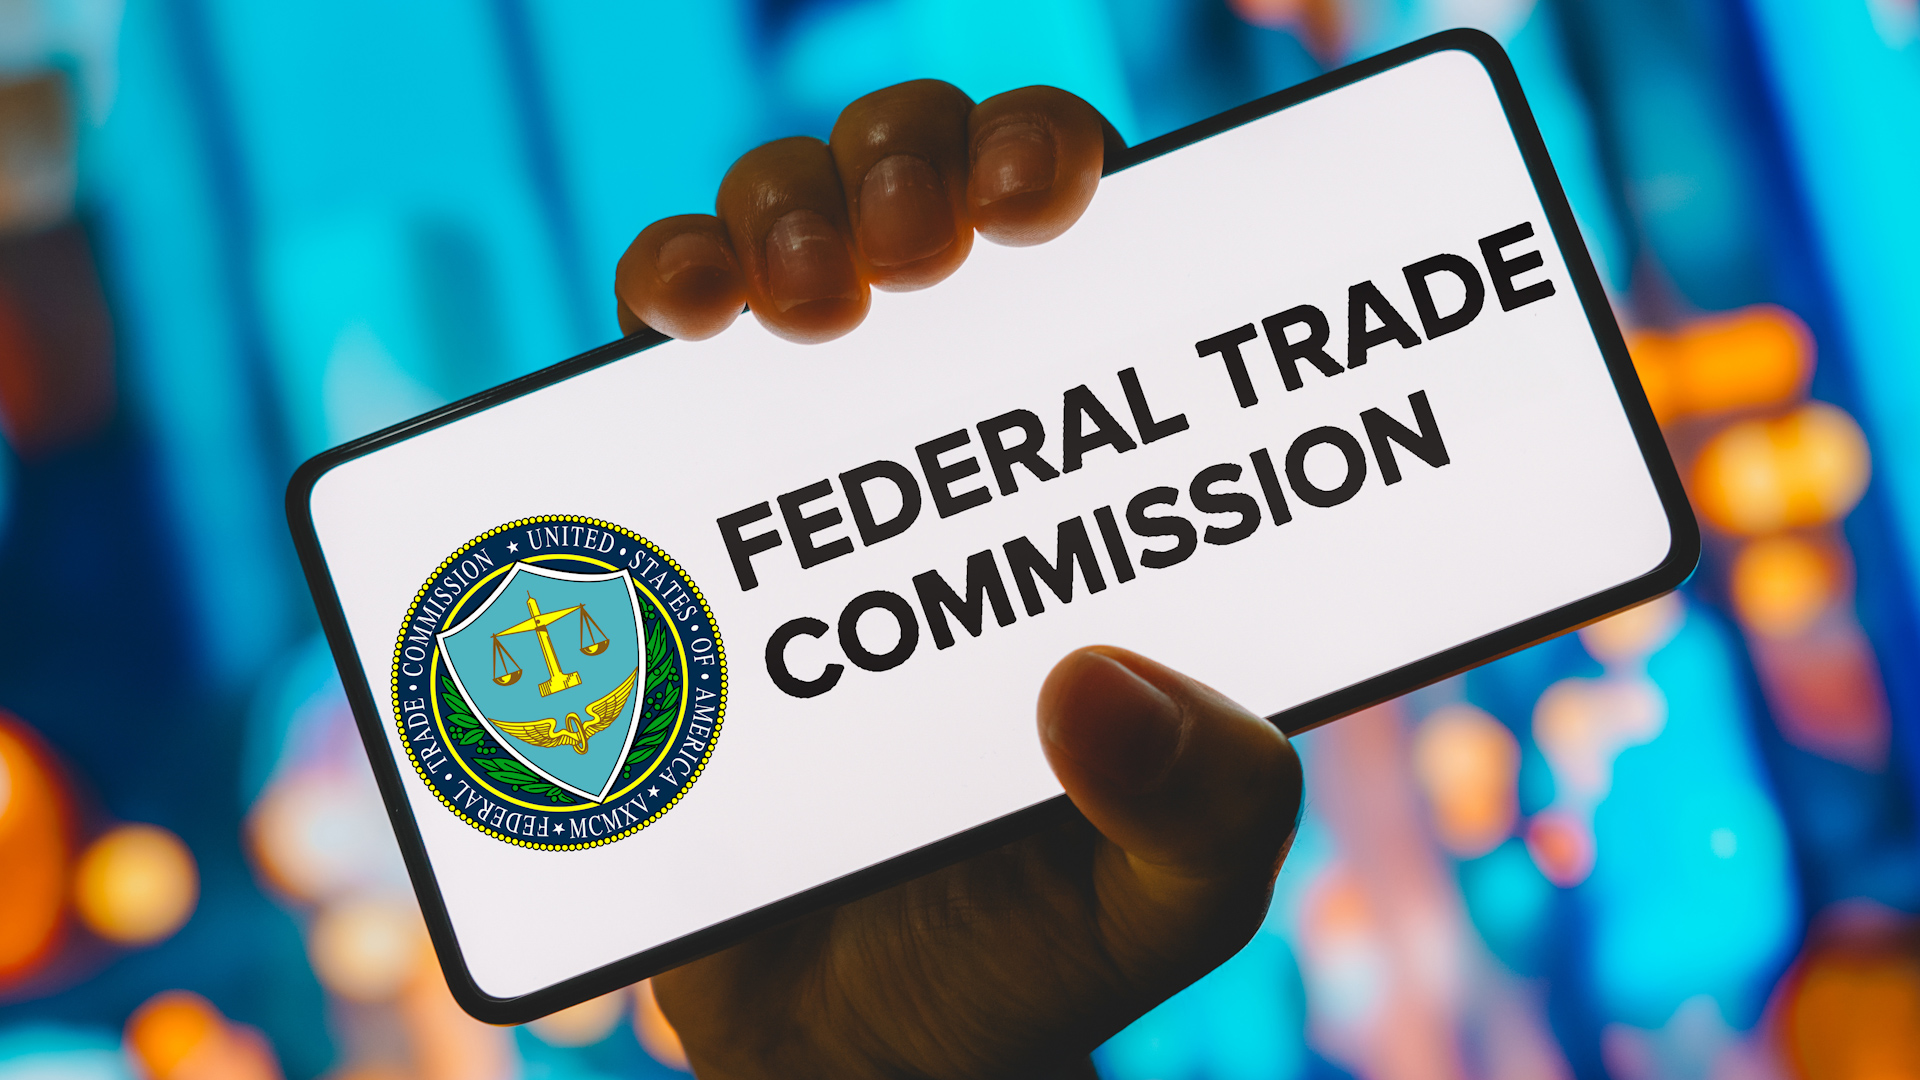 The FTC voted to ban non-compete agreements potentially raising wages by 0 billion annually, though opponents predict legal challenges.